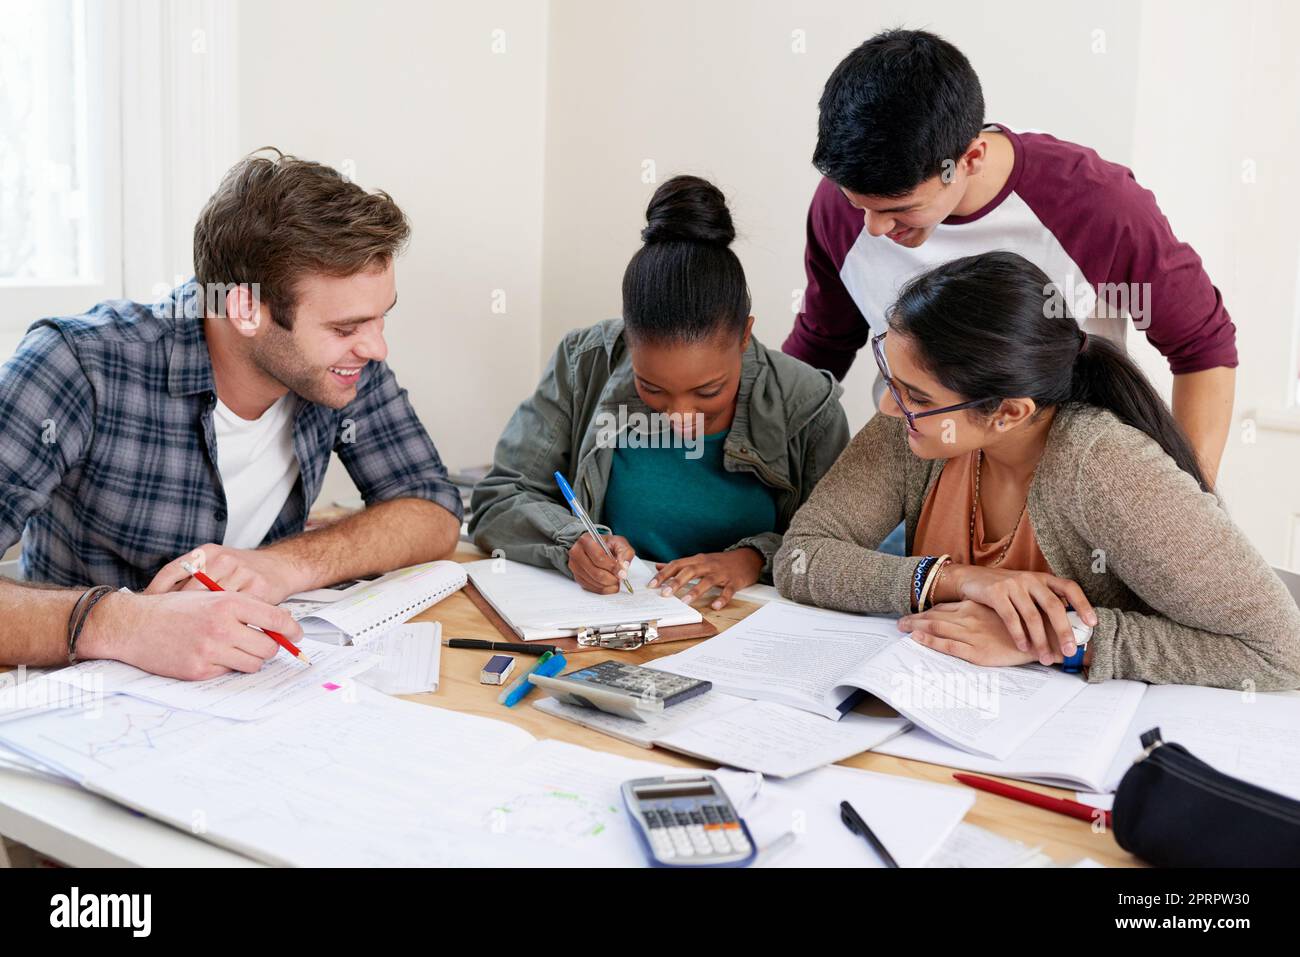 Watching her work. a group of university students in a study group. Stock Photo